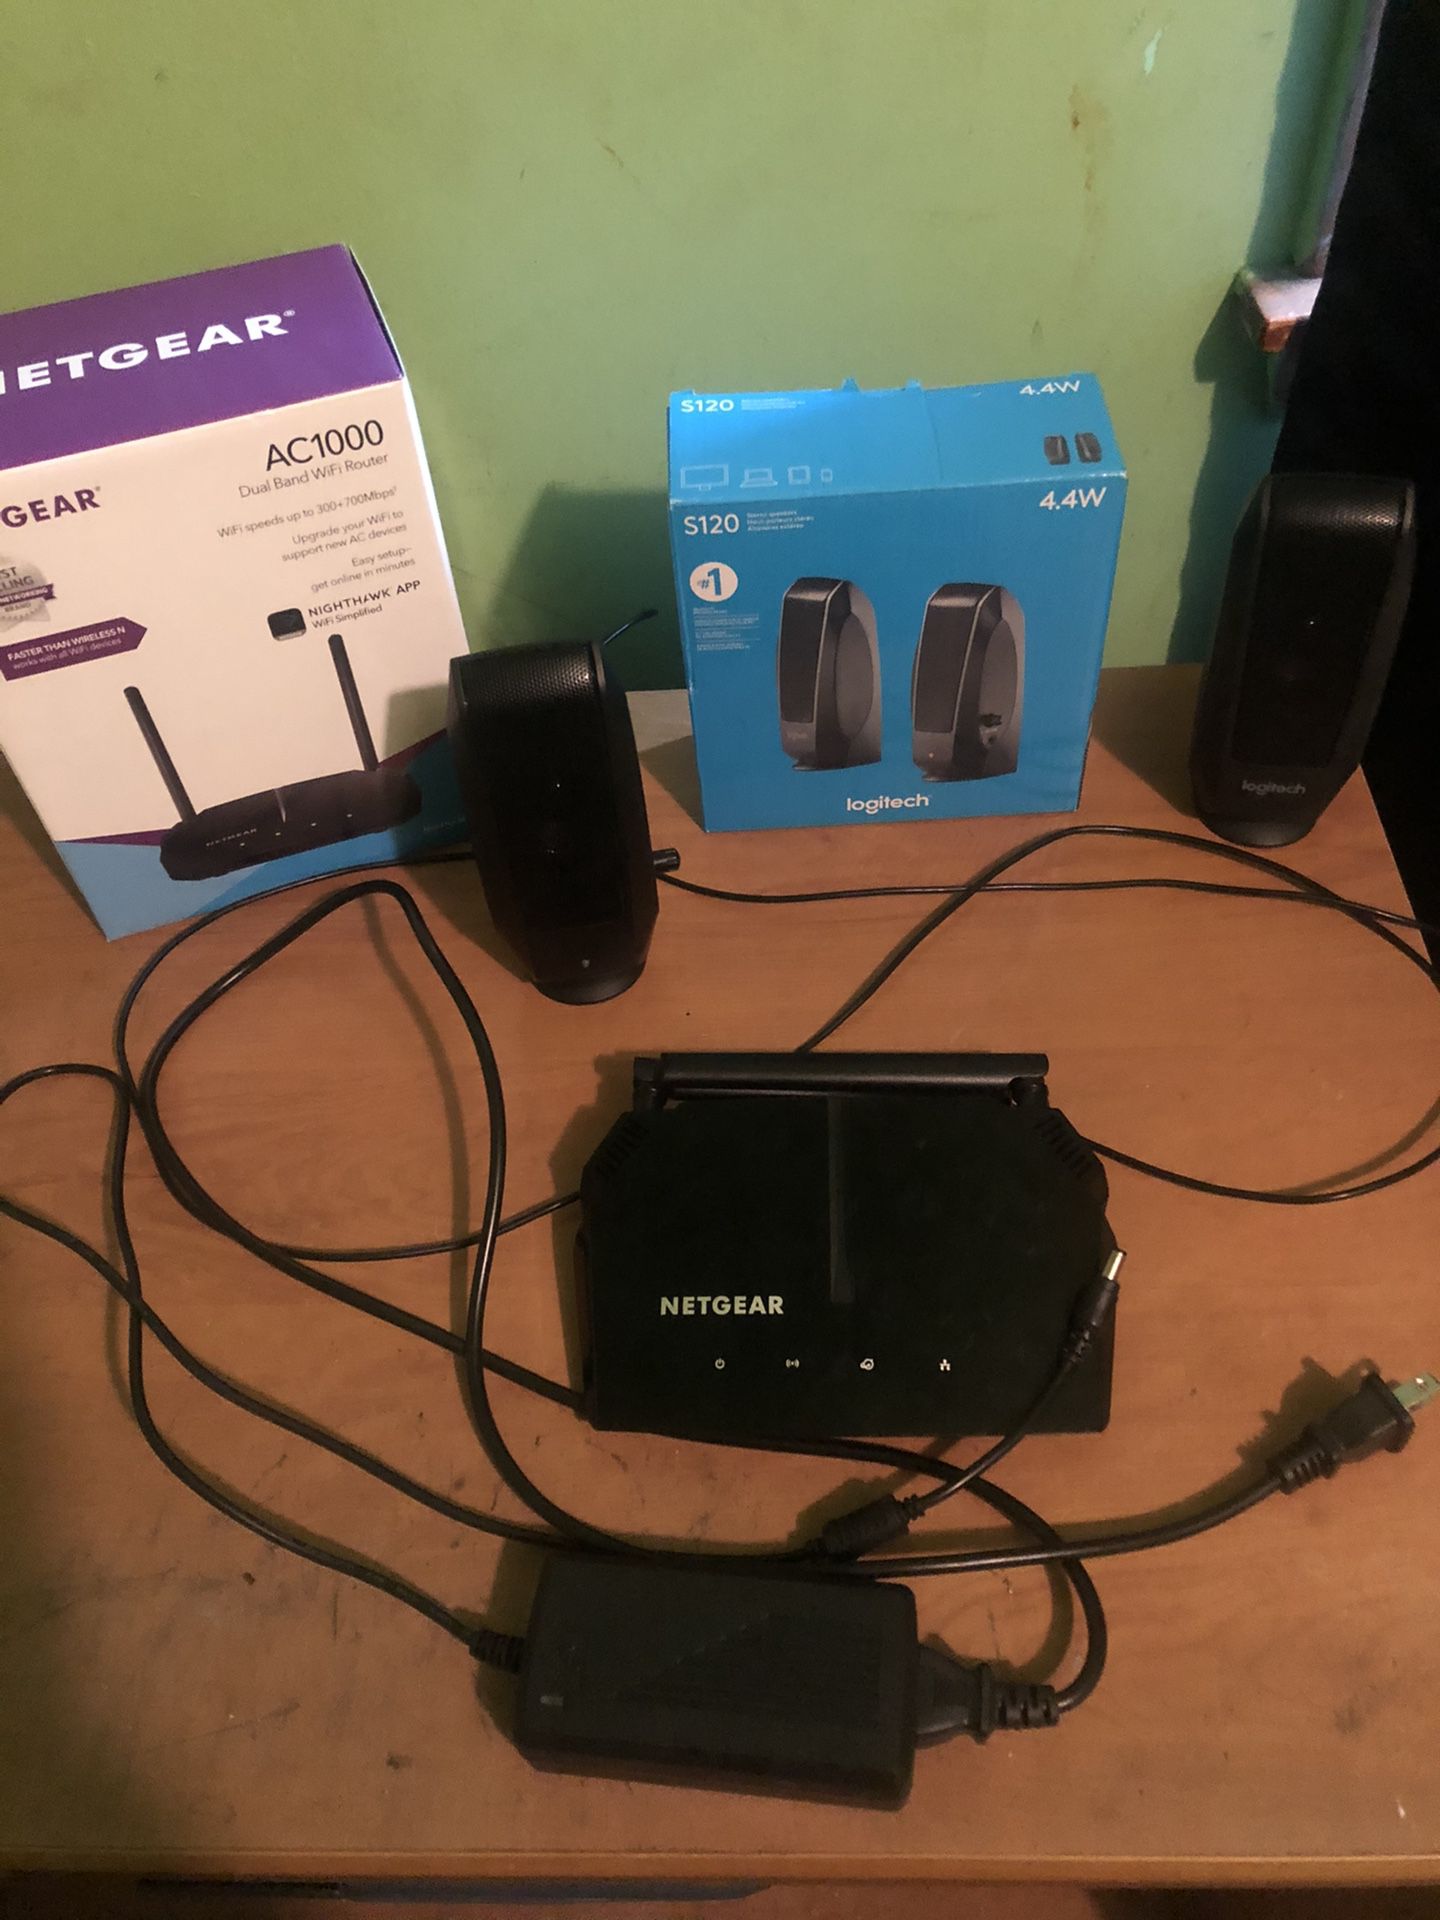 WiFi router and speakers